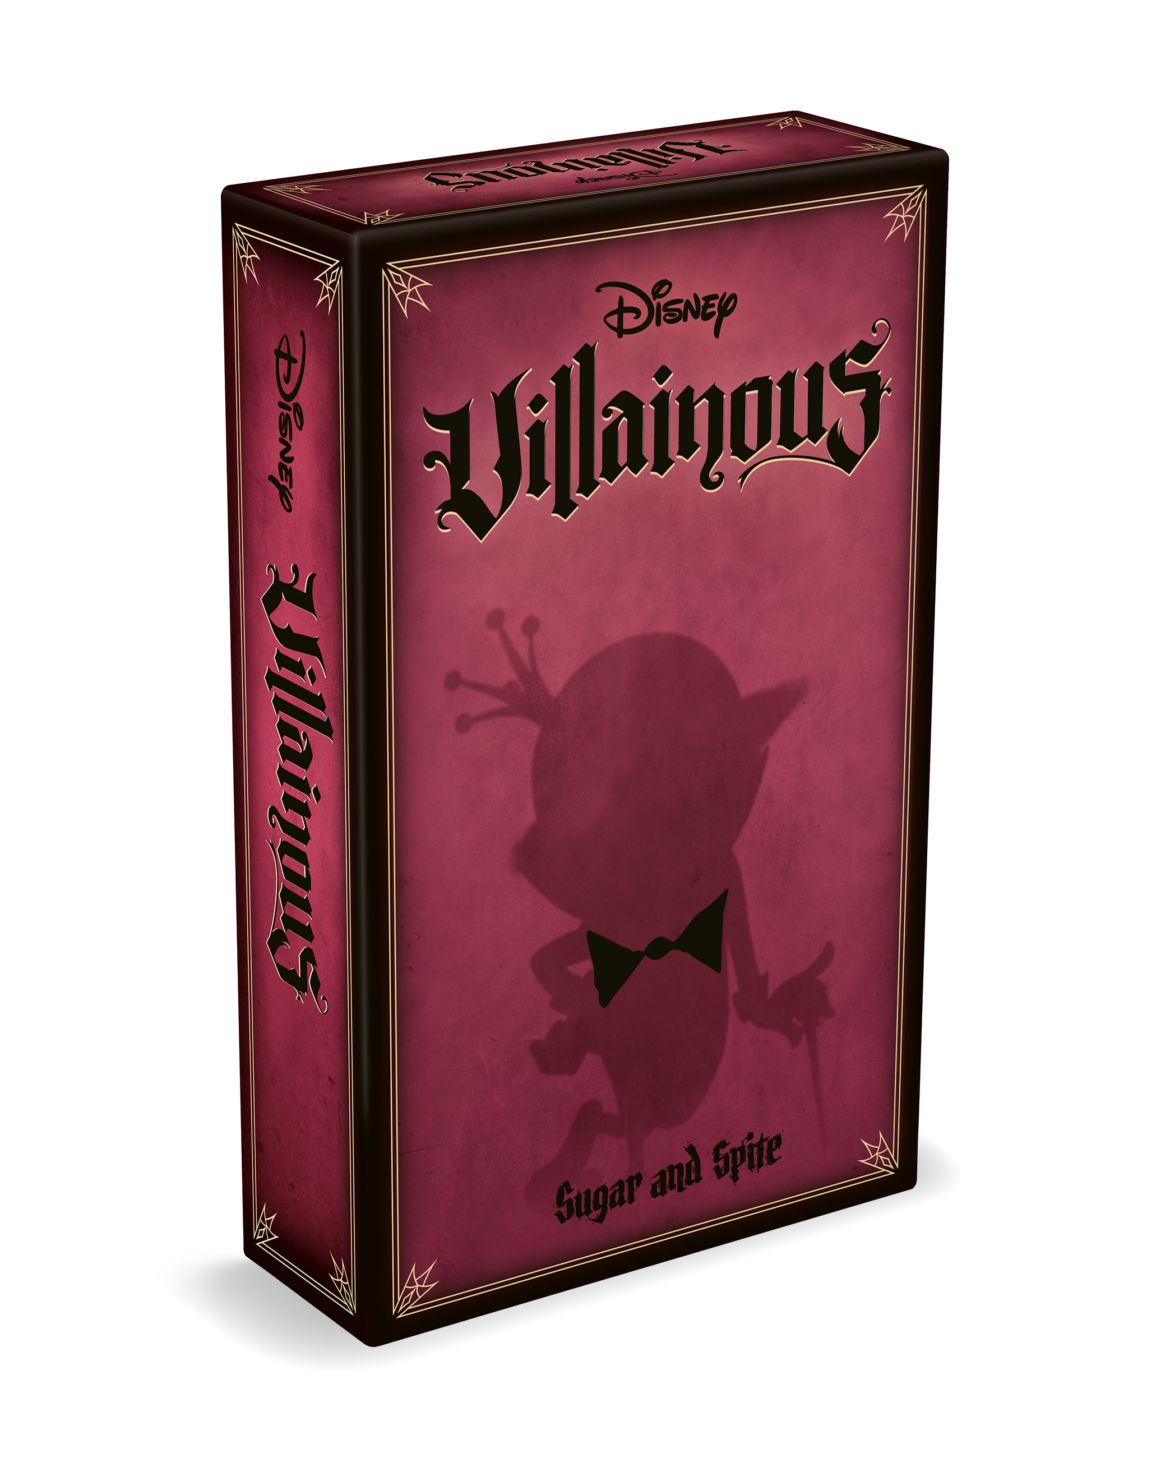 New Disney Villainous Alert: Revamped Introduction to Evil and Sugar and Spite